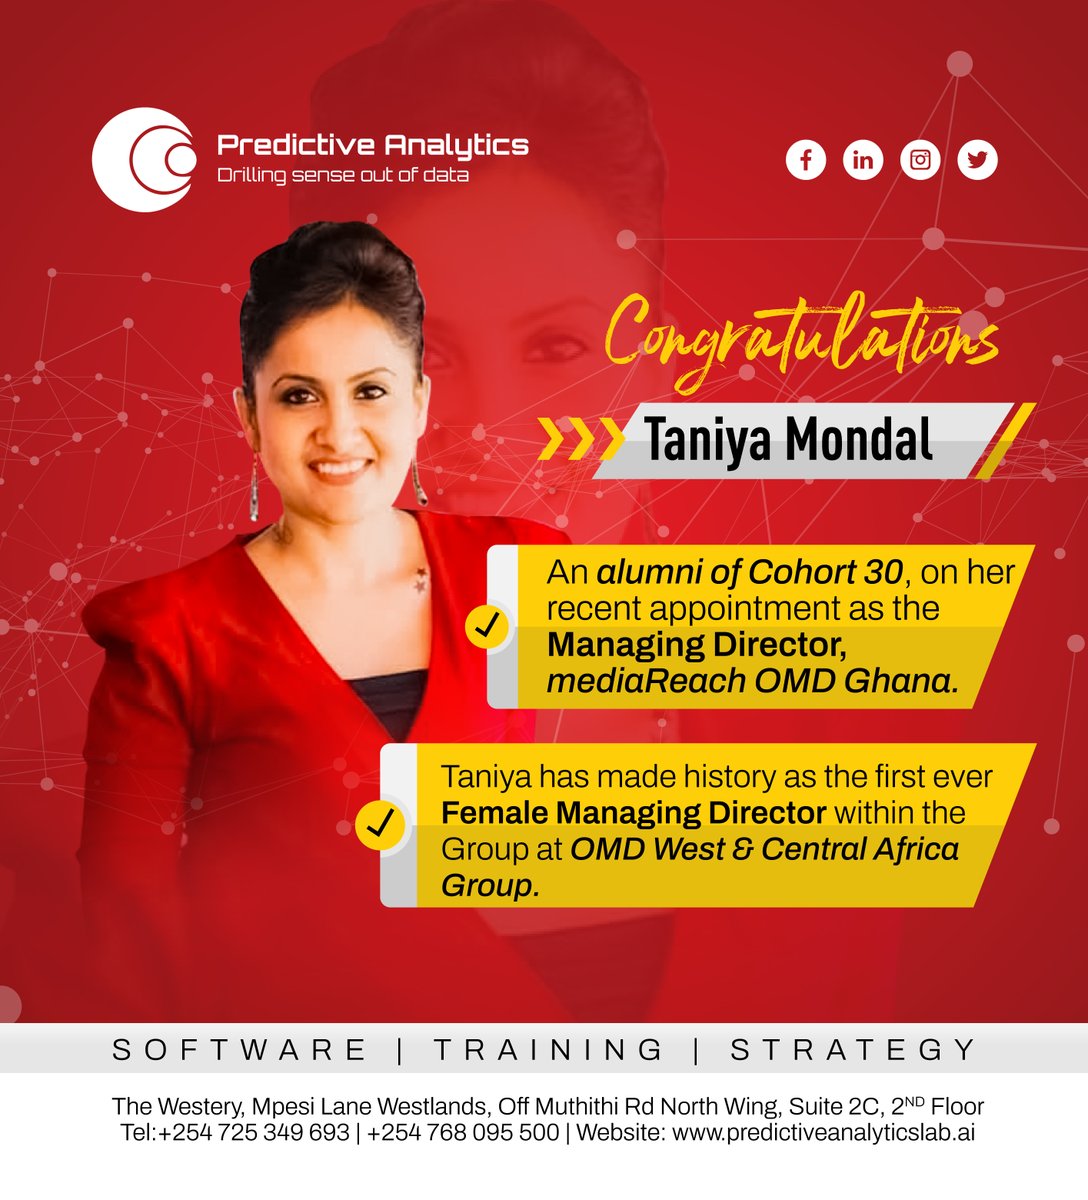 Congratulations to our cohort 30 alumni Taniya Mondal  for ascending to the role of Managing Director at mediaReach OMD Ghana. Her journey from our course to this leadership position is a testament to her dedication and expertise.

#alumnipride #AlumniSuccess #DataScience